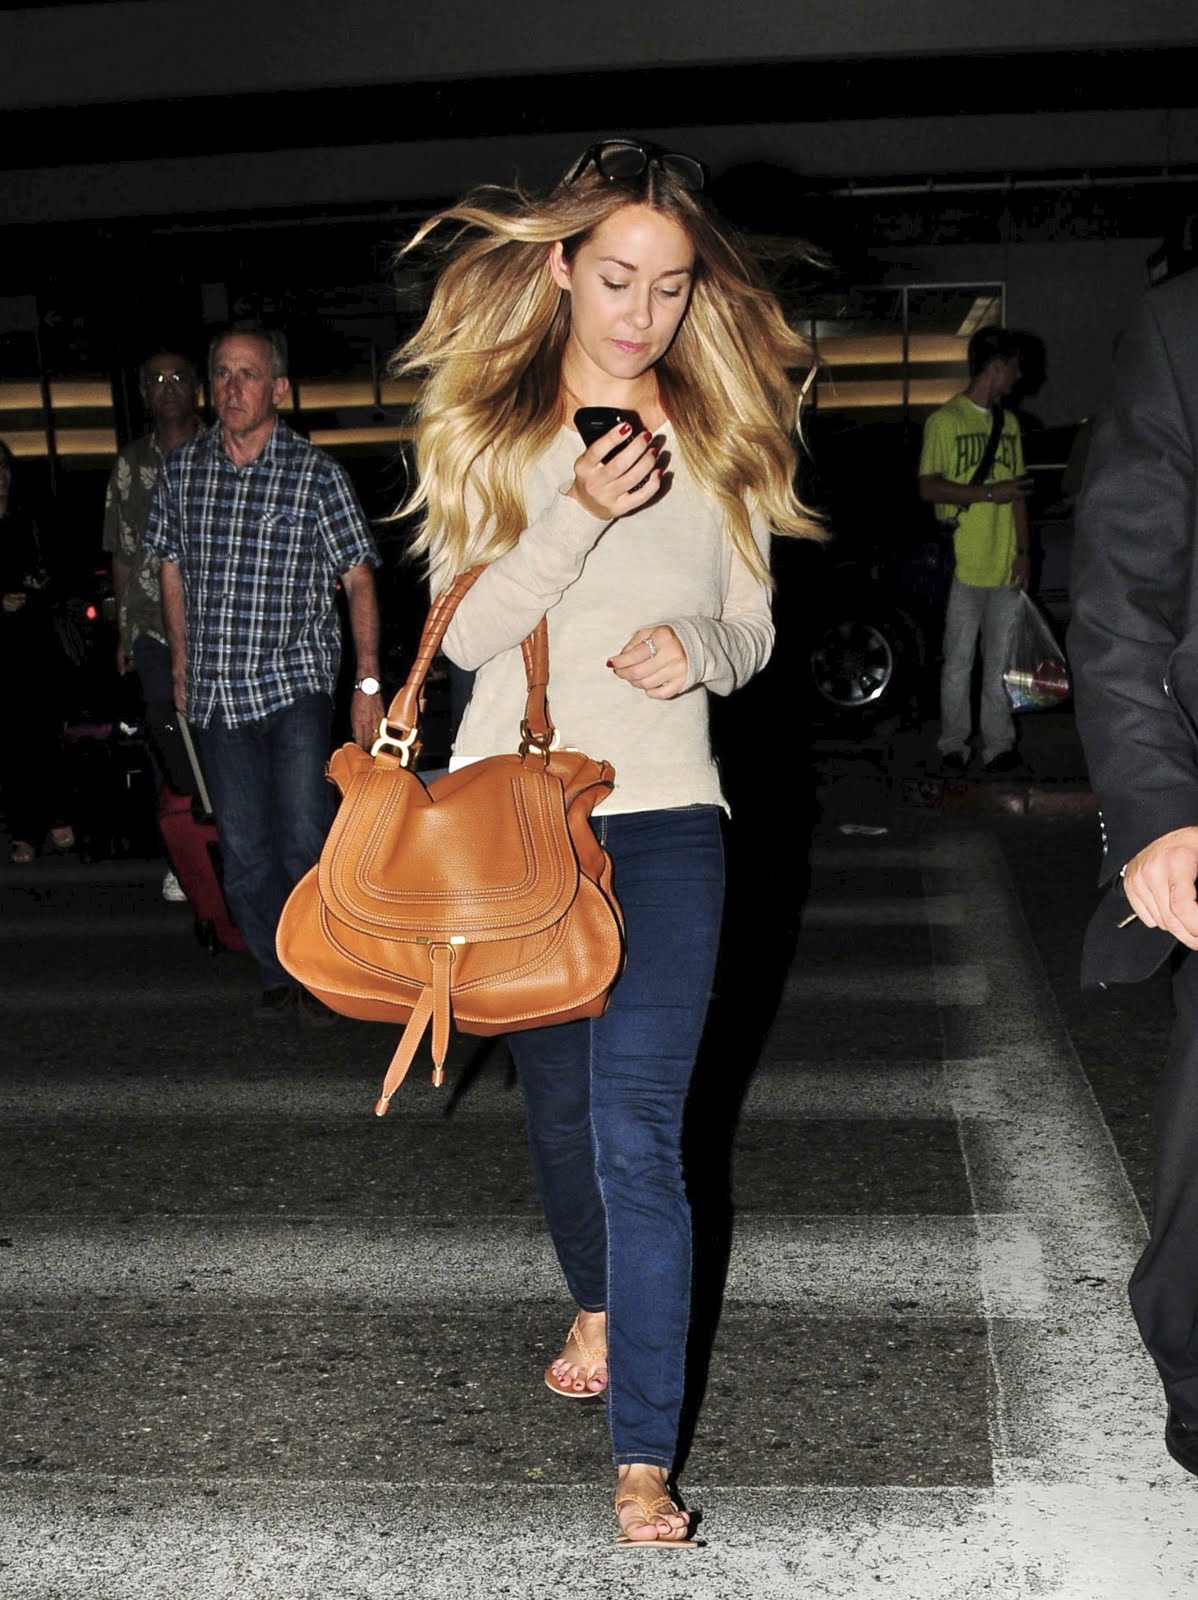 Hills Freak: Lauren Conrad Contends with Lost Luggage at LAX Airport